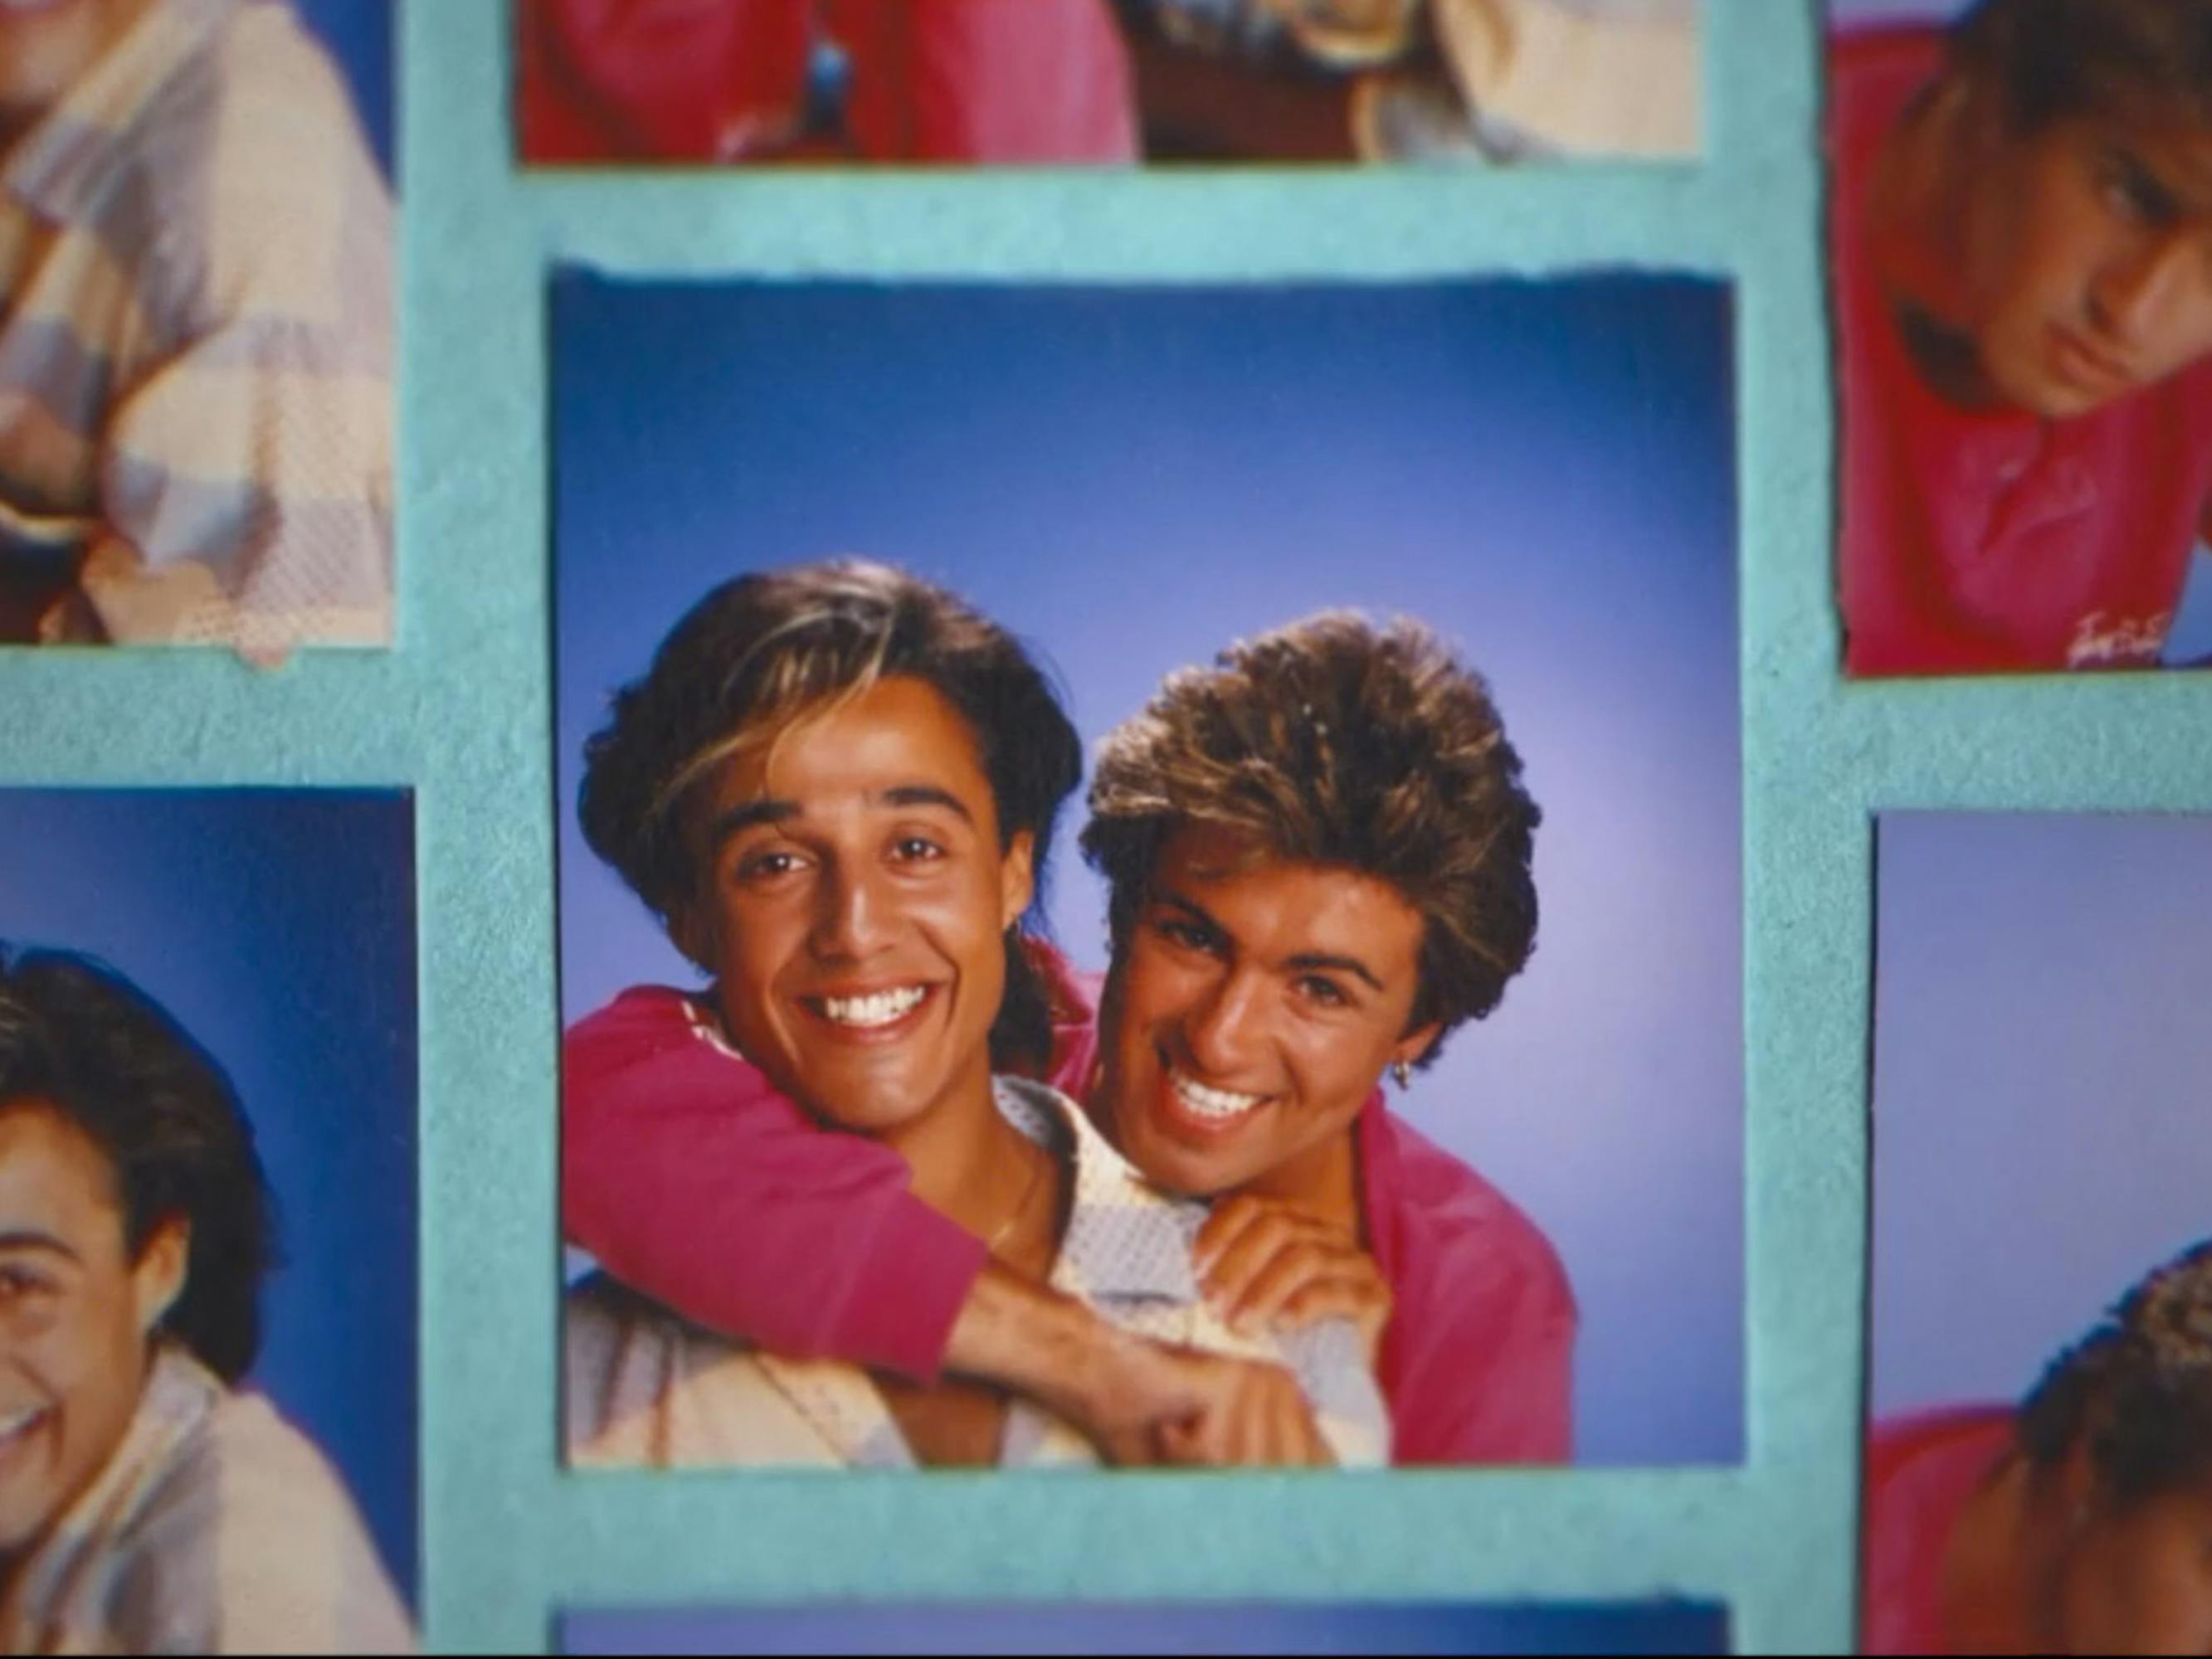 Andrew Ridgeley smiles as George Michael playfully hooks an arm around his neck.